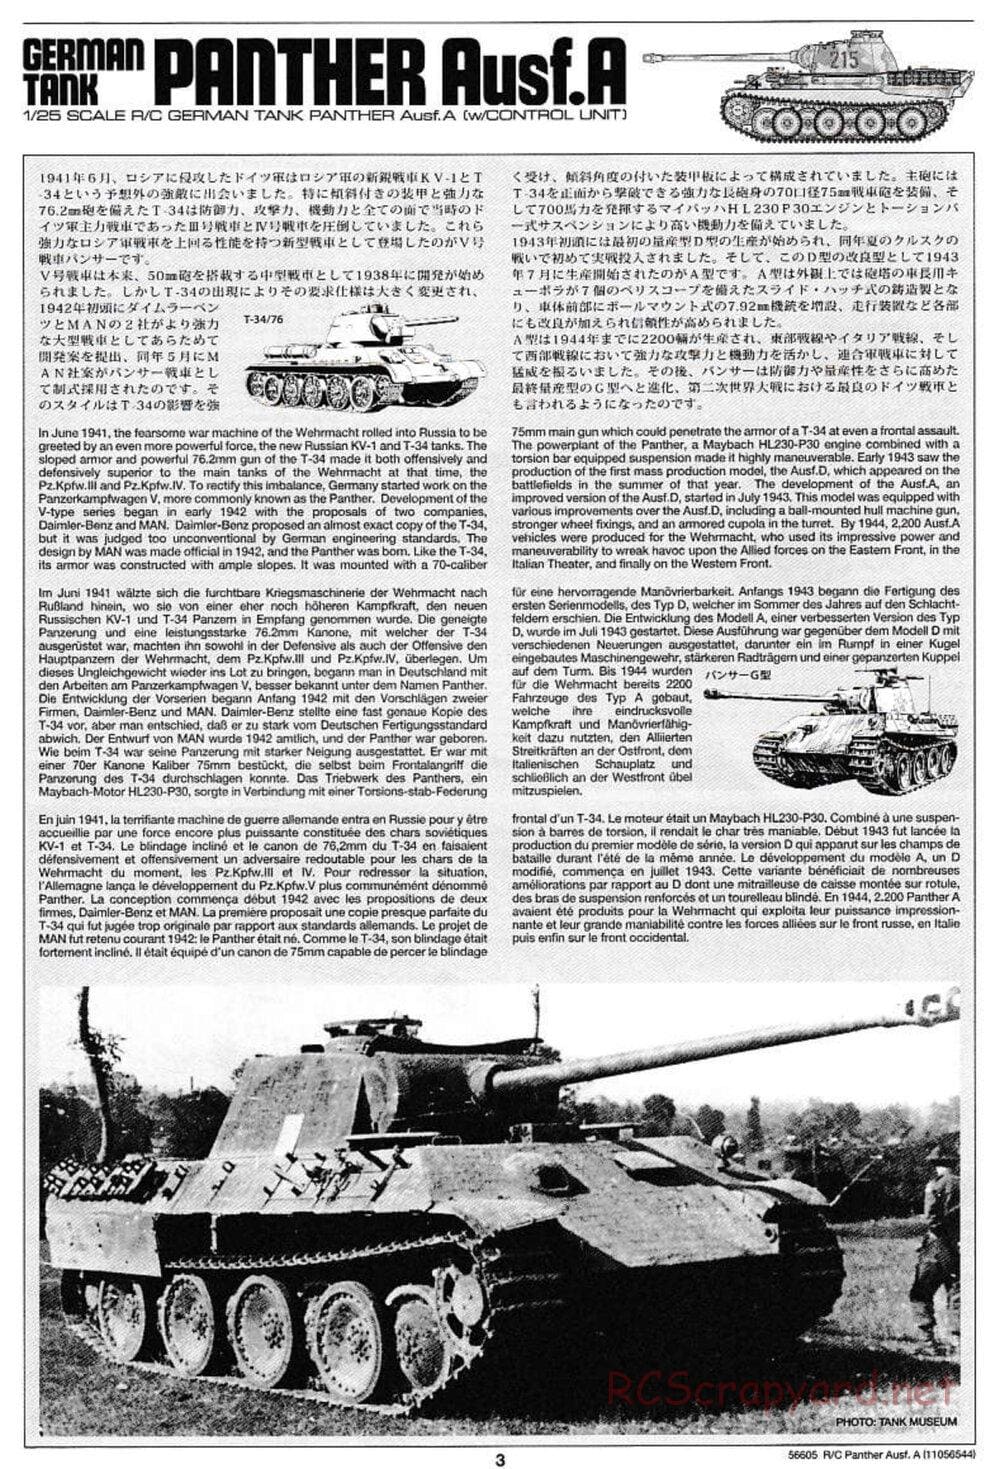 Tamiya - German Tank Panther Ausf.A - 1/25 Scale Chassis - Manual - Page 3